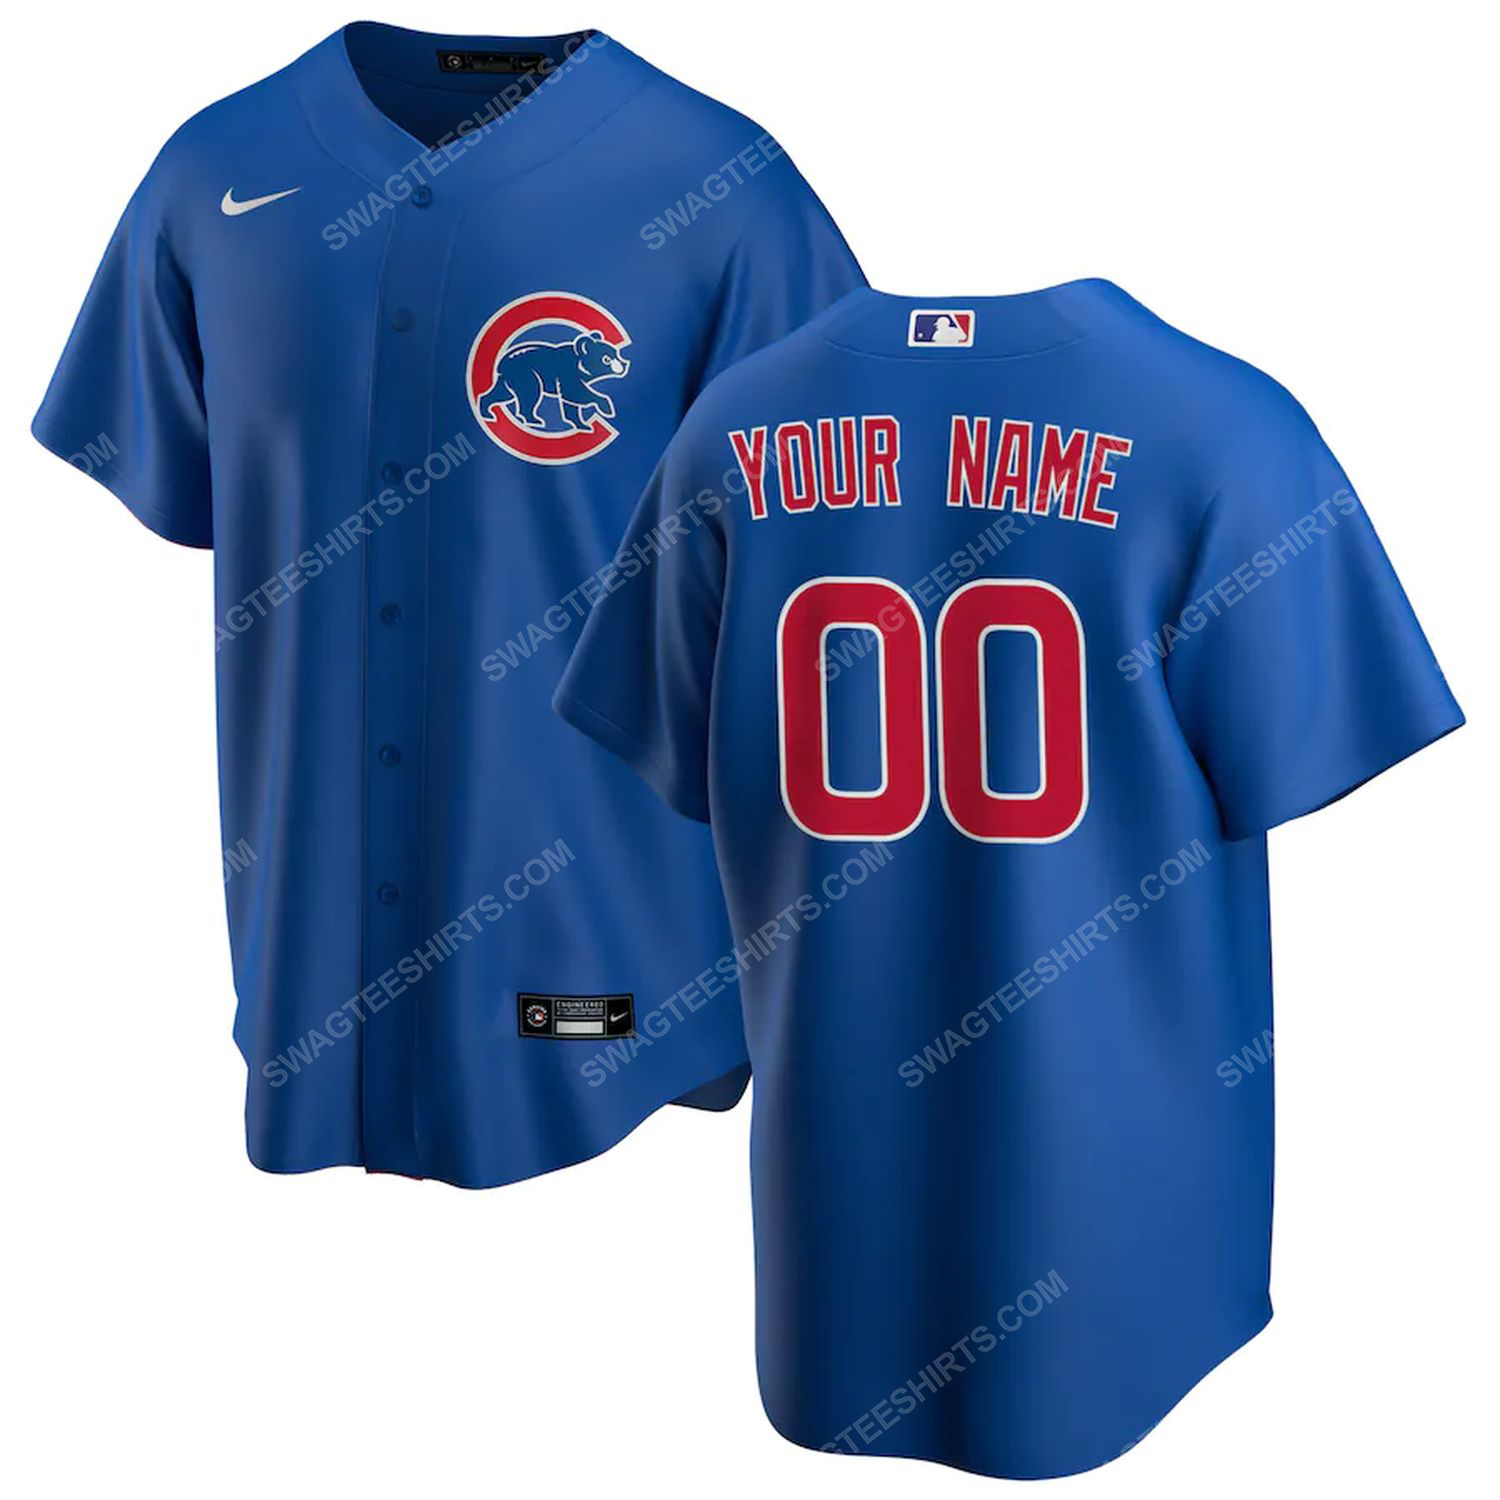 Personalized mlb chicago cubs team baseball jersey-royal